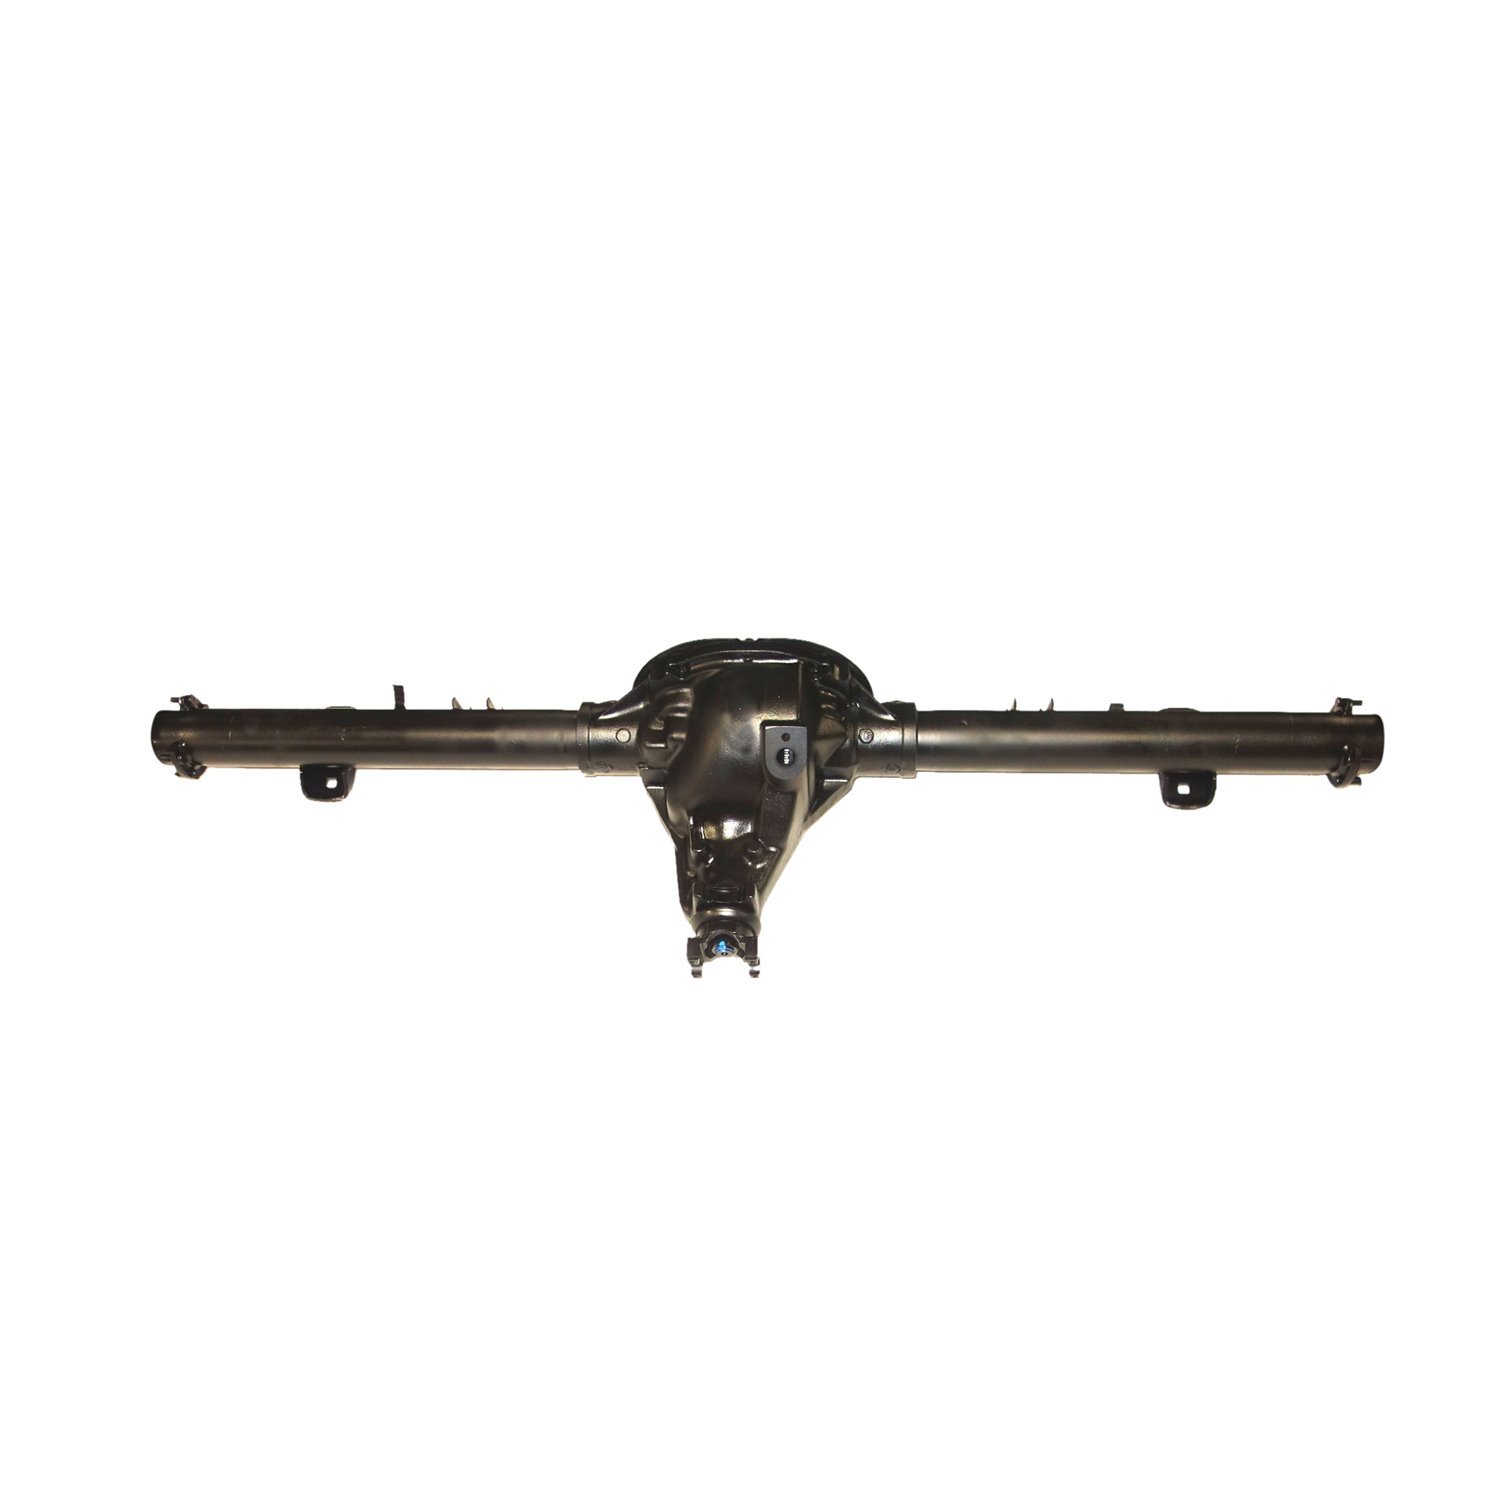 Remanufactured Complete Axle Assembly for Chy 8.25" 1989 1/2 Ton, D100, D150, 2.71, 2wd